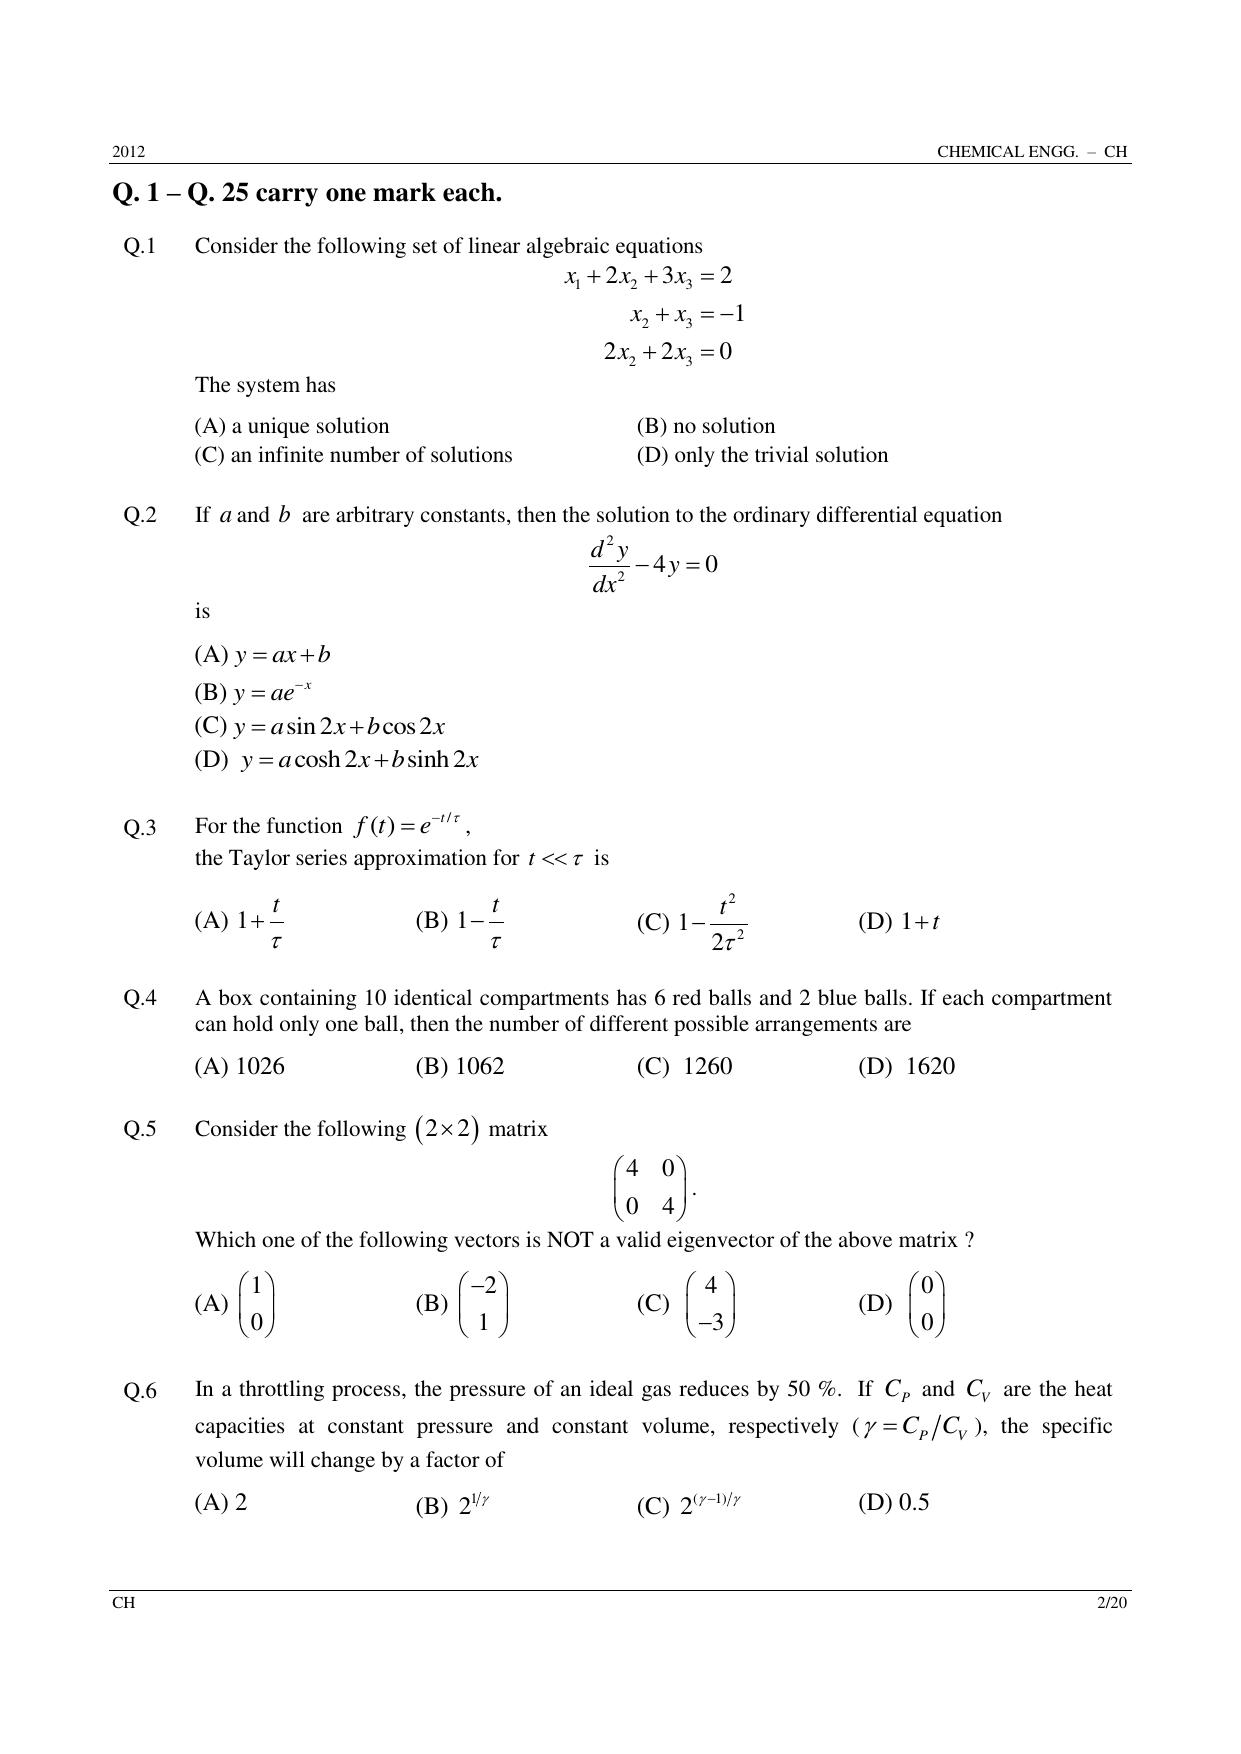 GATE 2012 Chemical Engineering (CH) Question Paper with Answer Key - Page 2